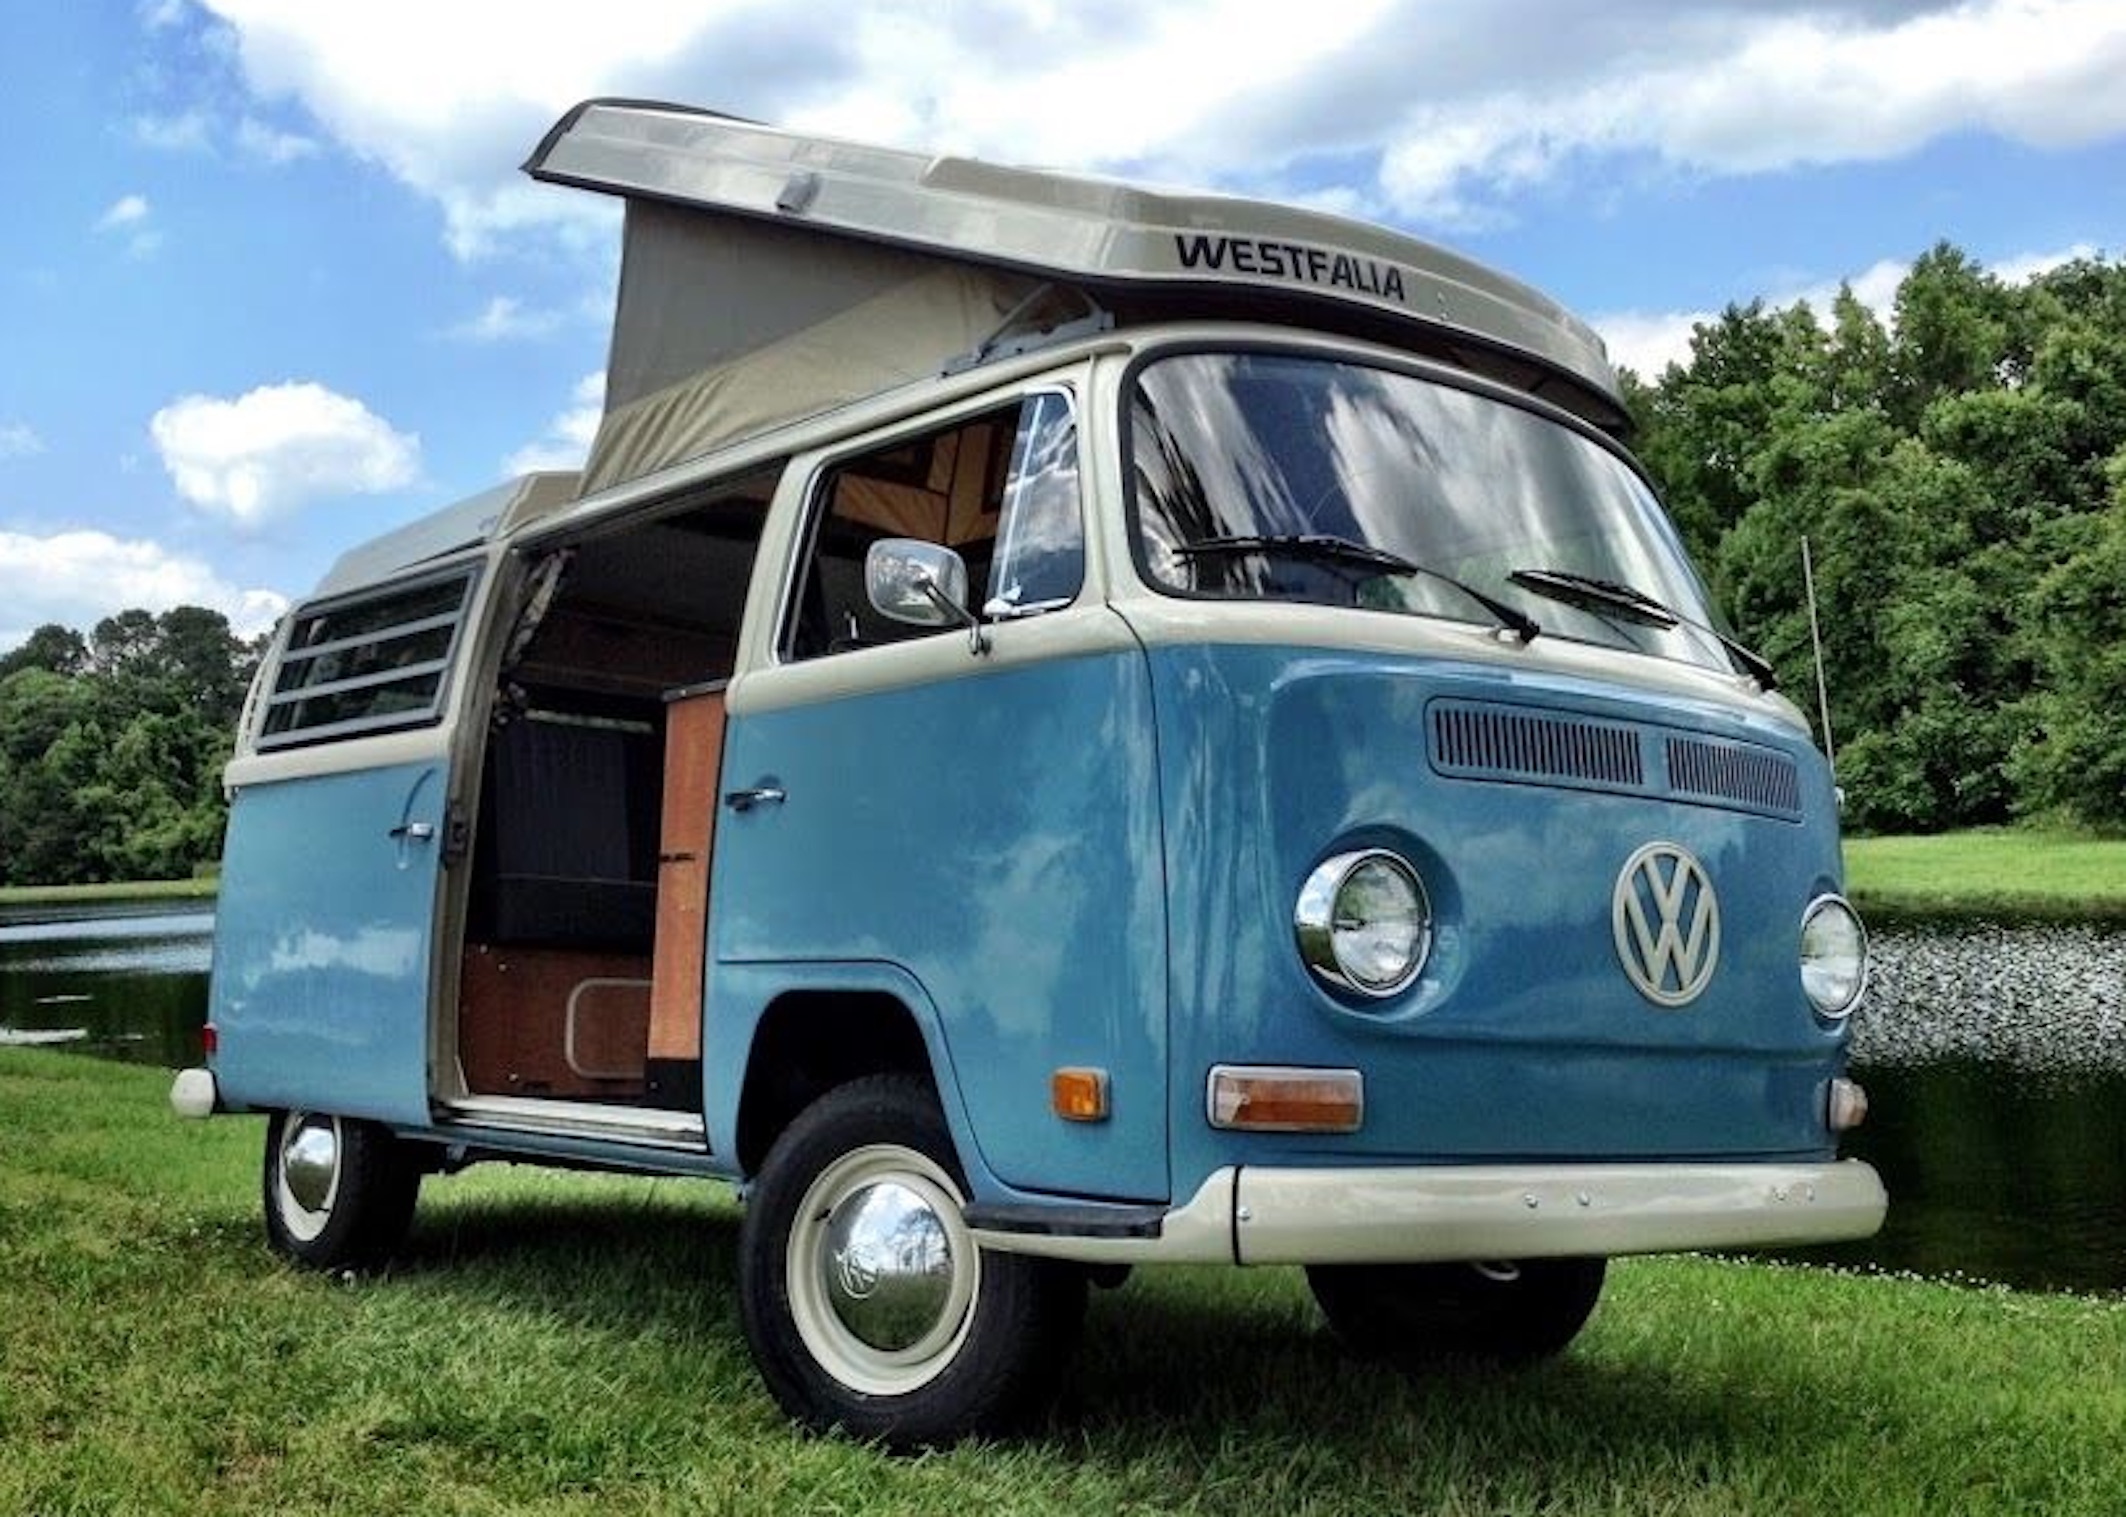 VW camper for sale the best 5 campers you can buy right now